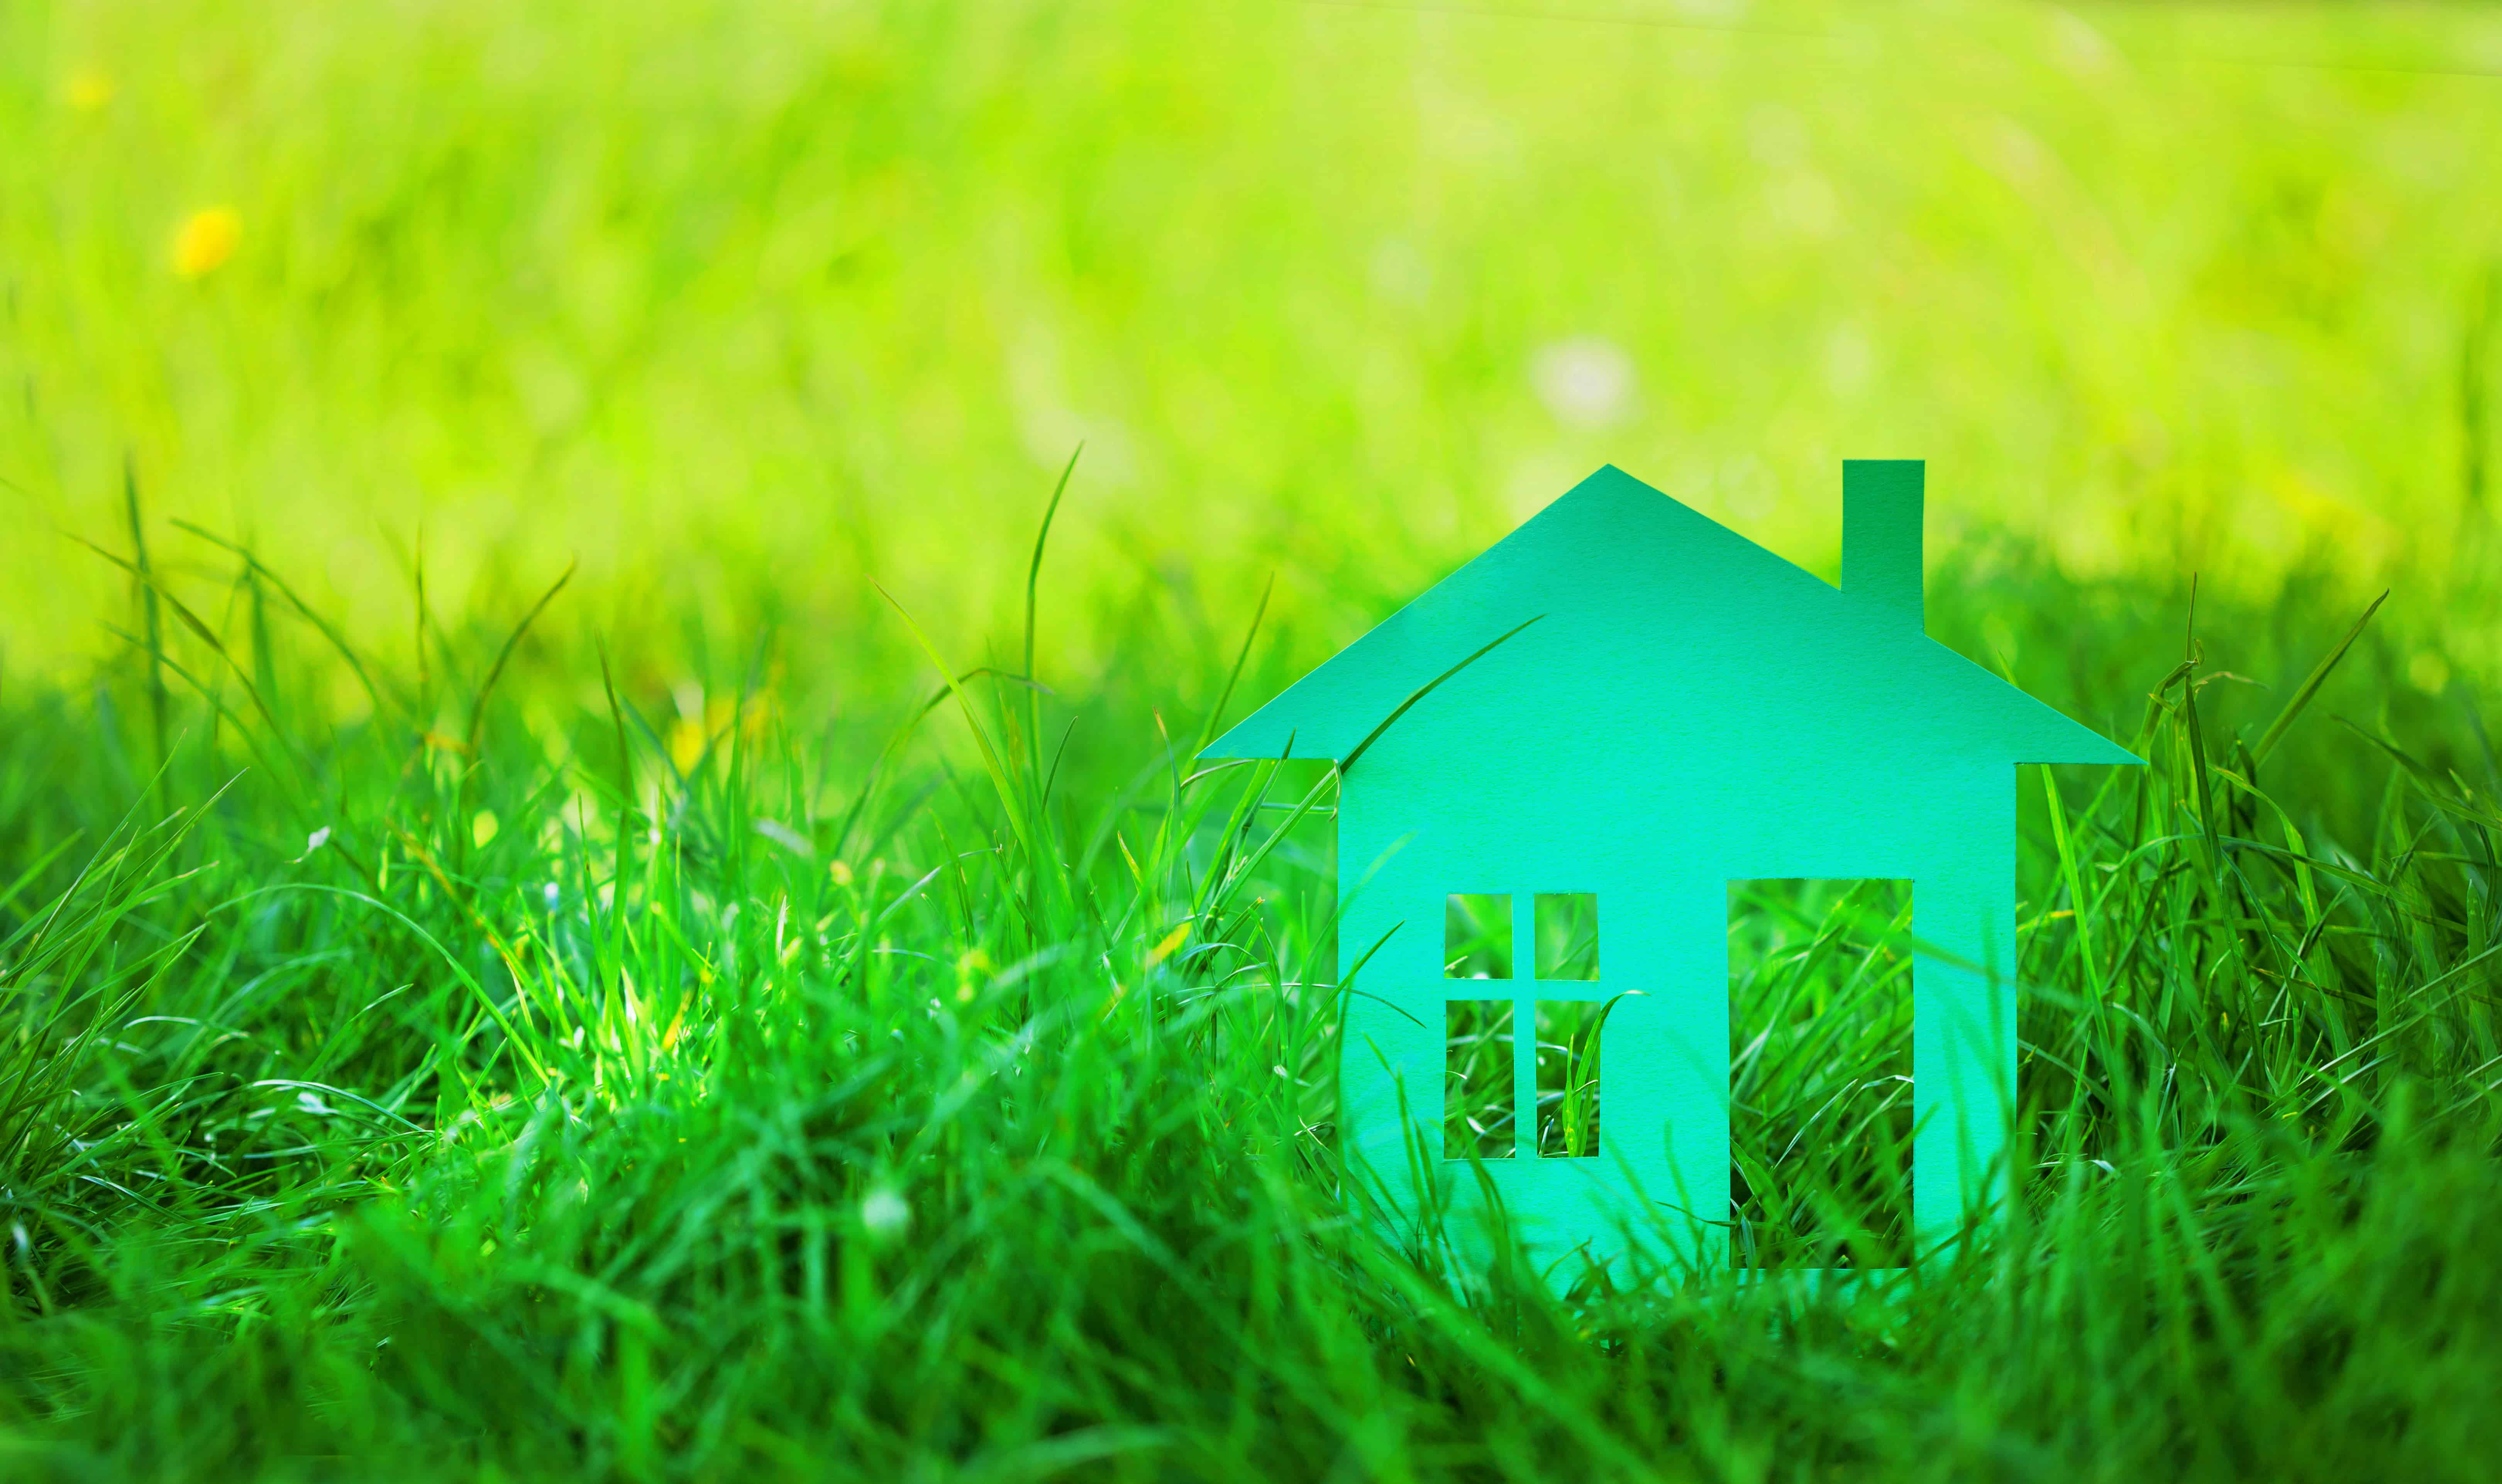 SimplyBiz Group welcomes growth of green mortgages market